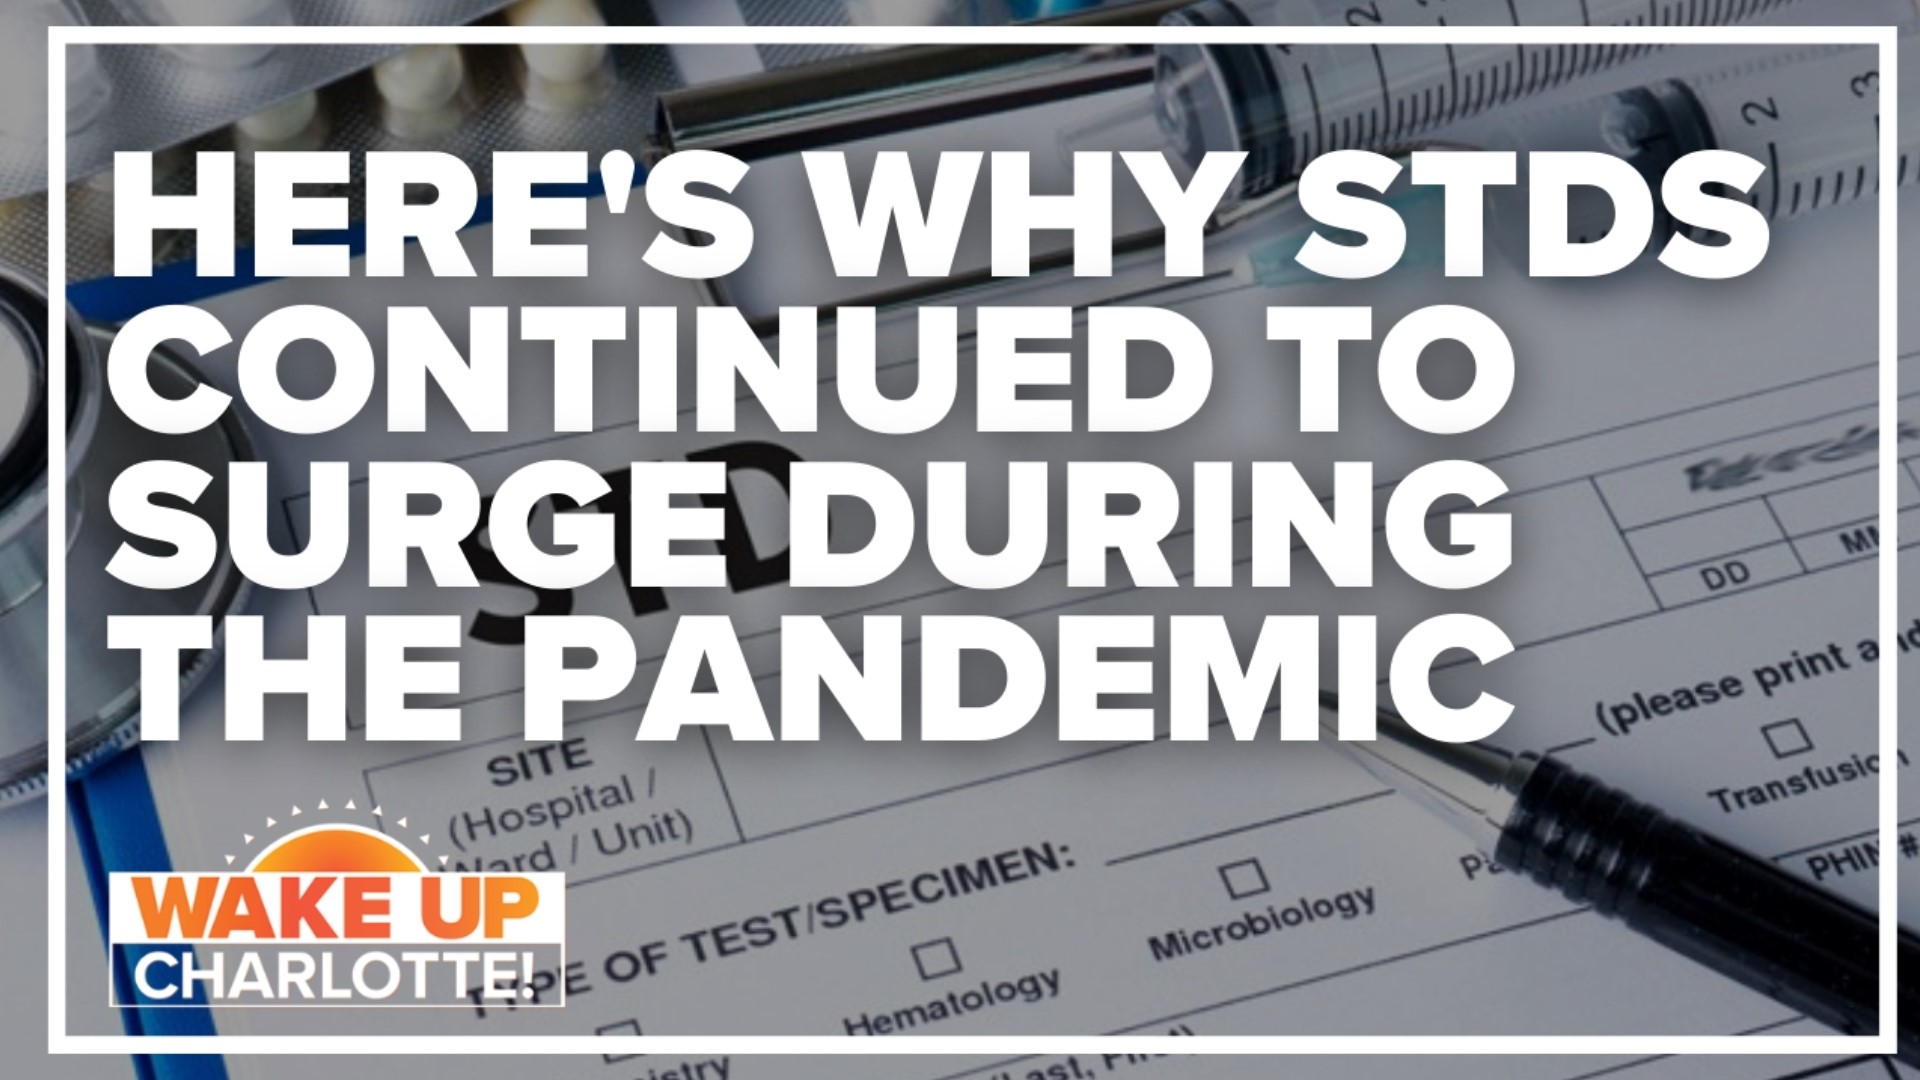 CDC data shows reported cases dropped during the early months of the pandemic, before surging at the end of 2020.